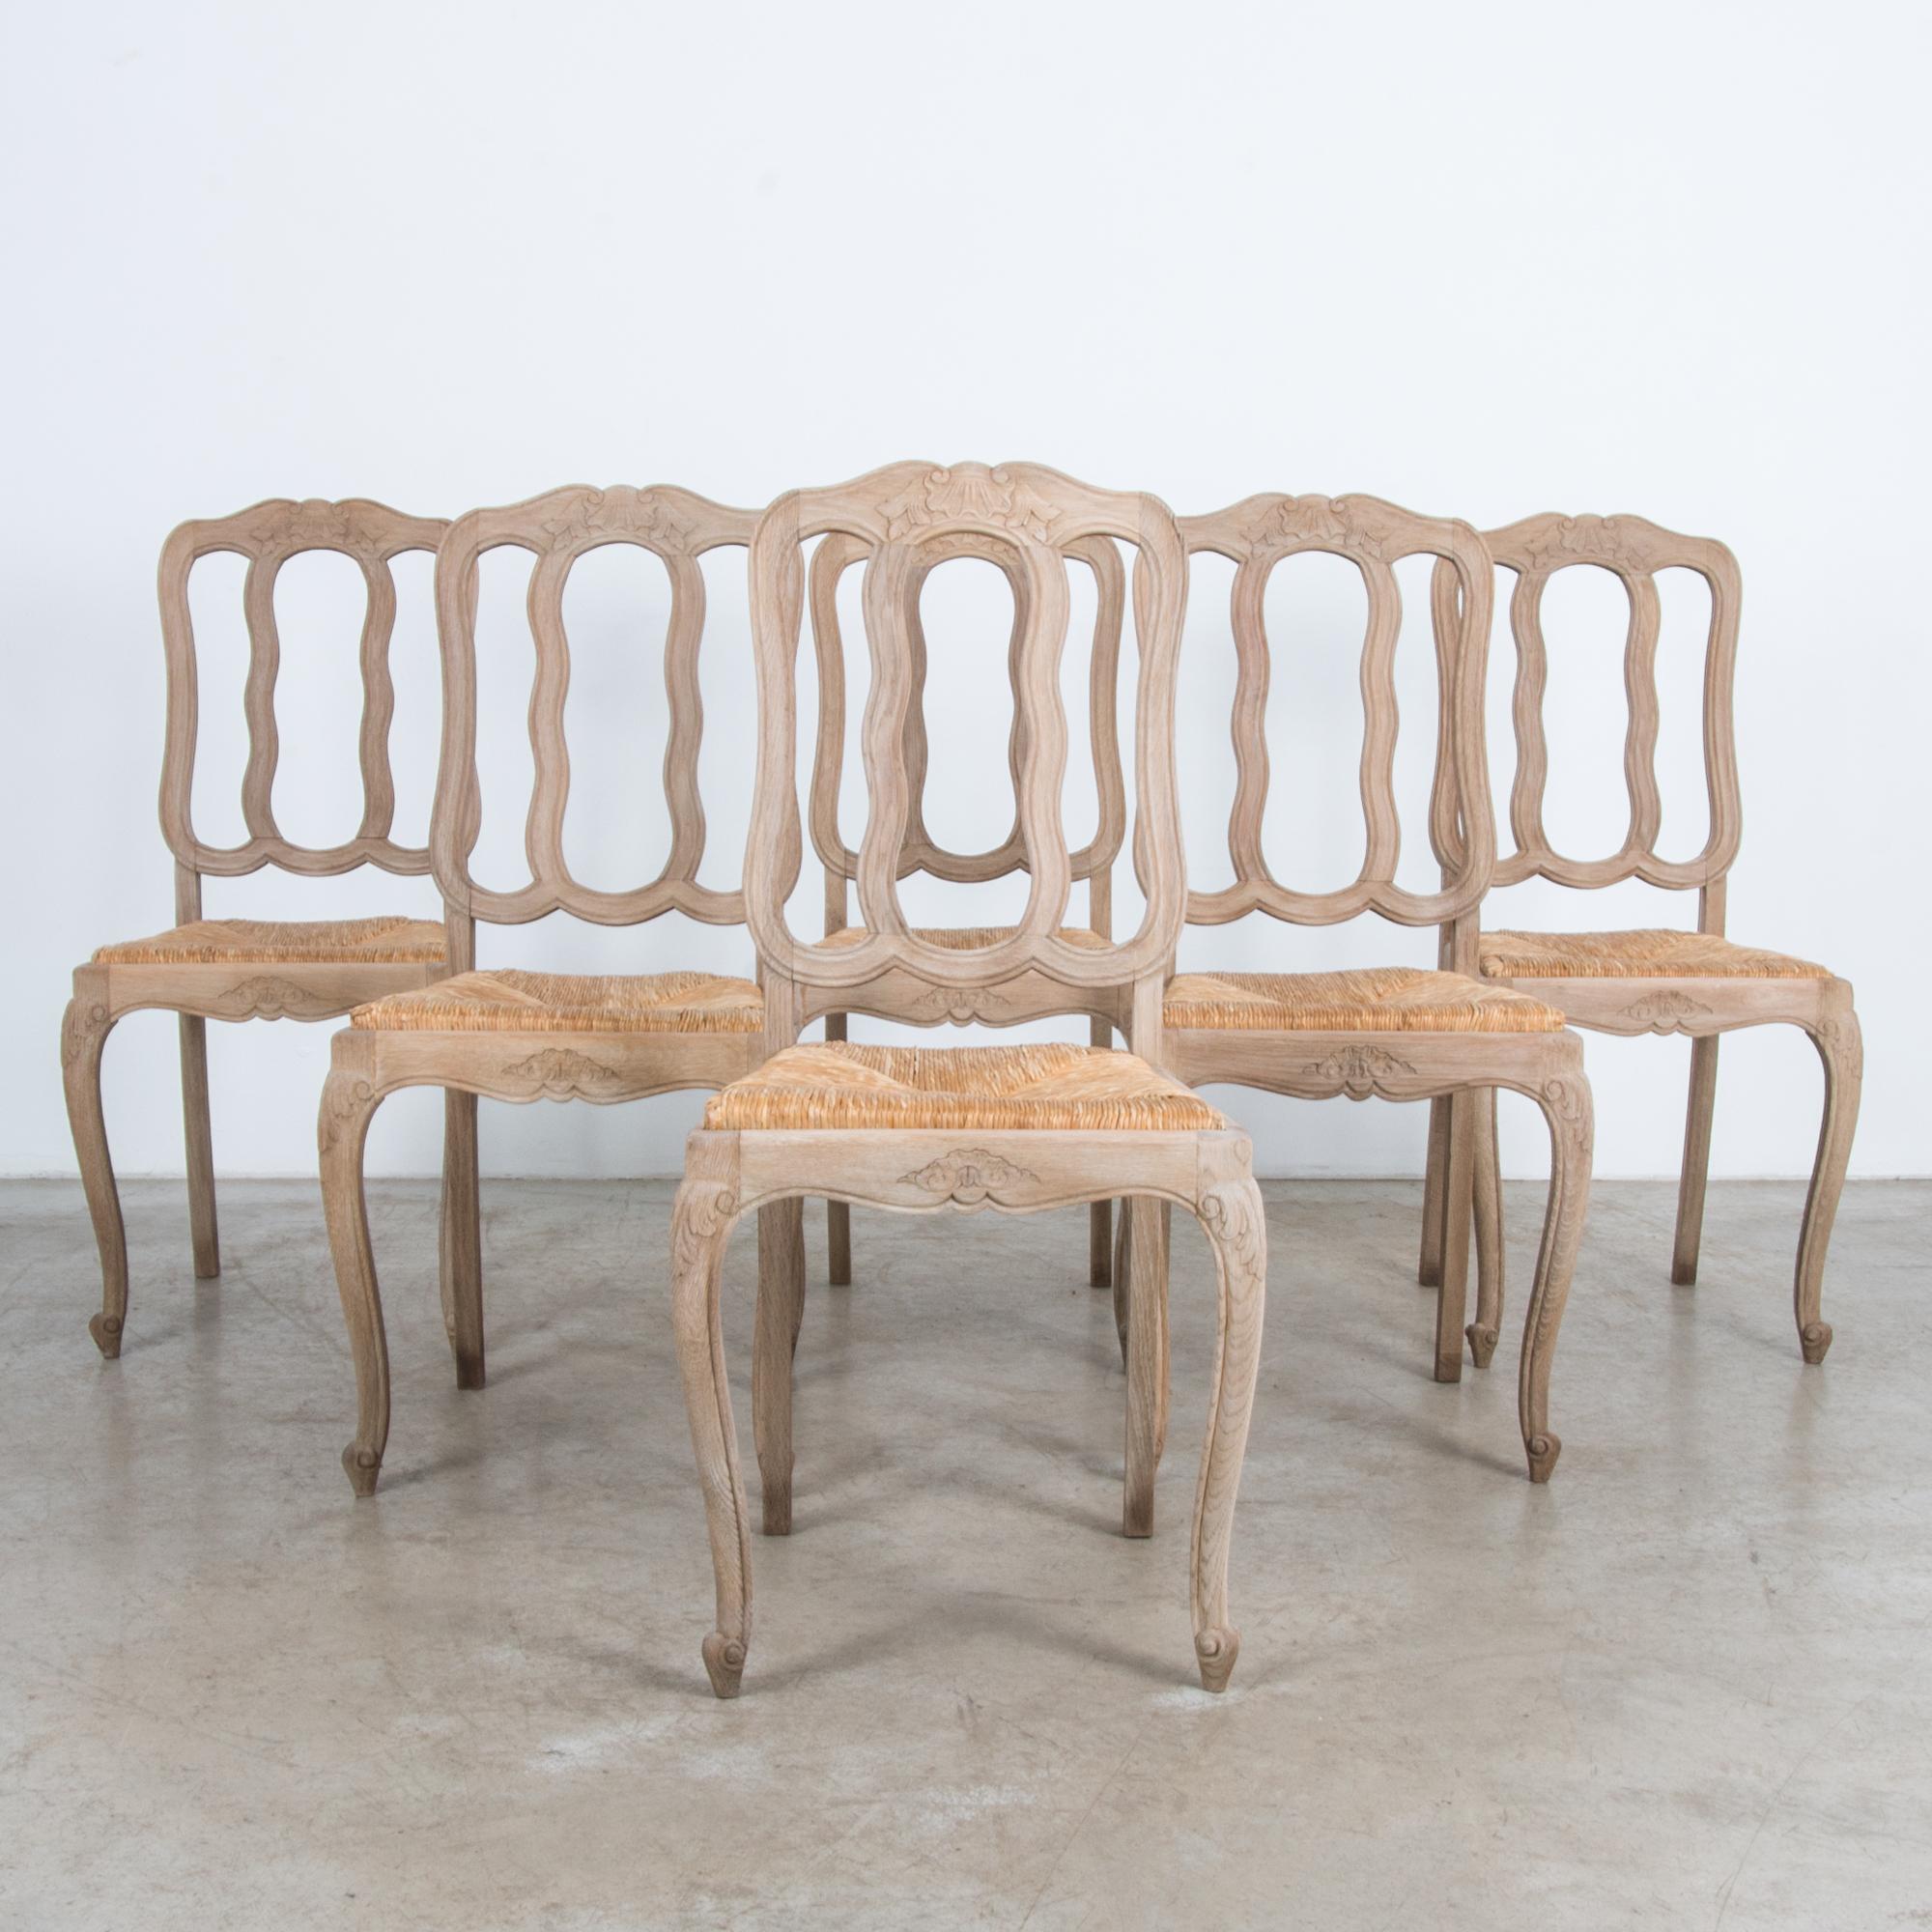 This set of six oak dining chairs from Belgium, circa 1950, combines a classical French shape with a wicker seat for a refined yet casual effect. The distinctive flowing curves of the chair back create soft loops that are echoed by scallop and